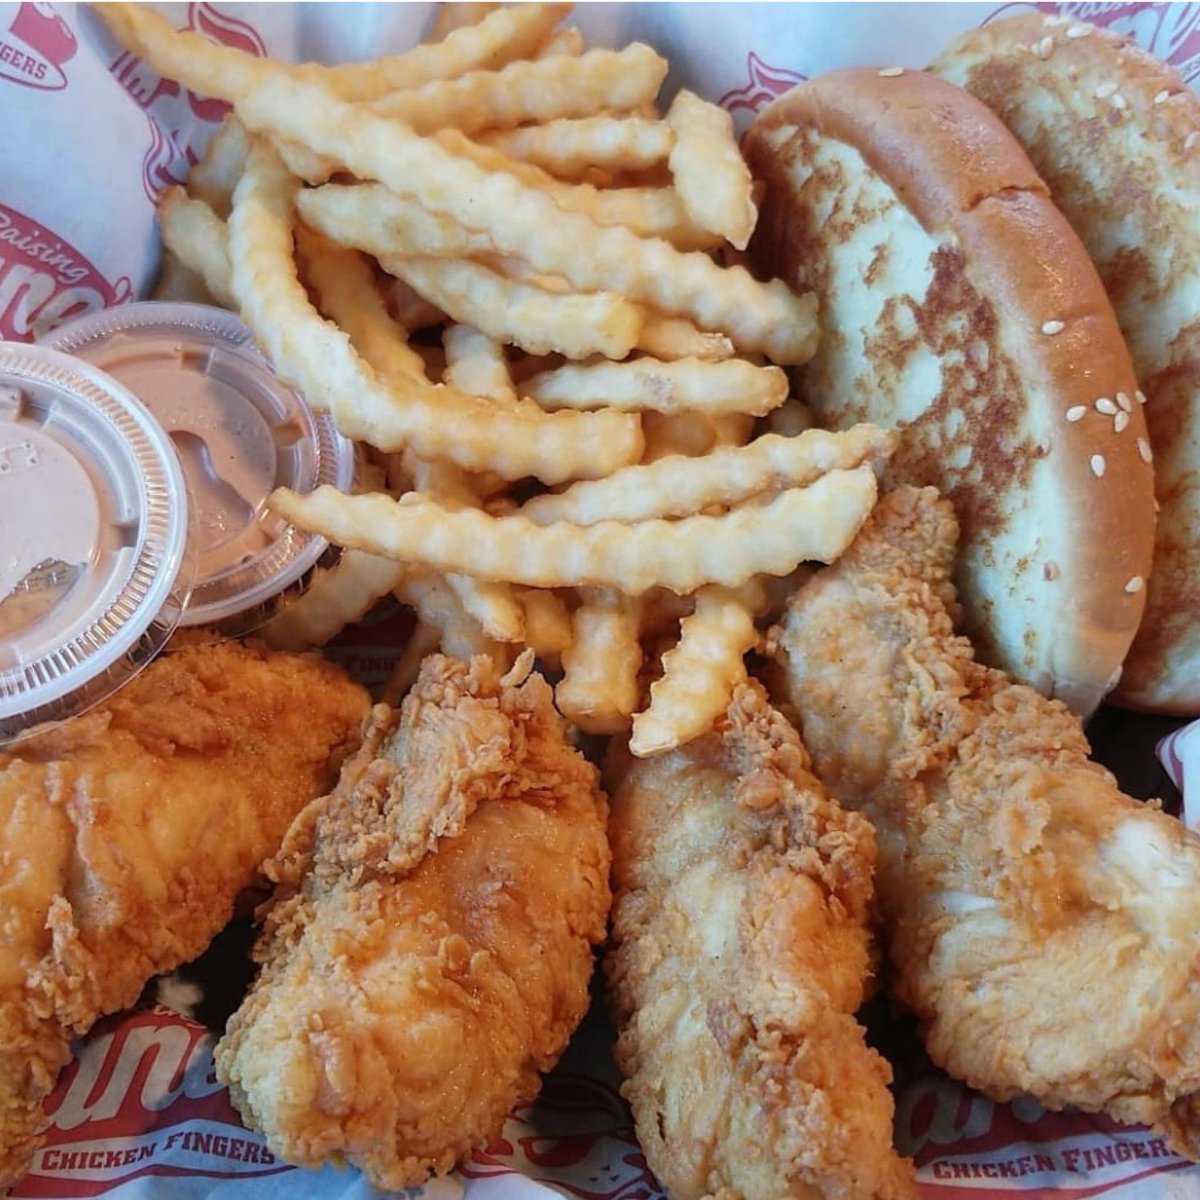 I Dream of the Day Cane's Comes to Town